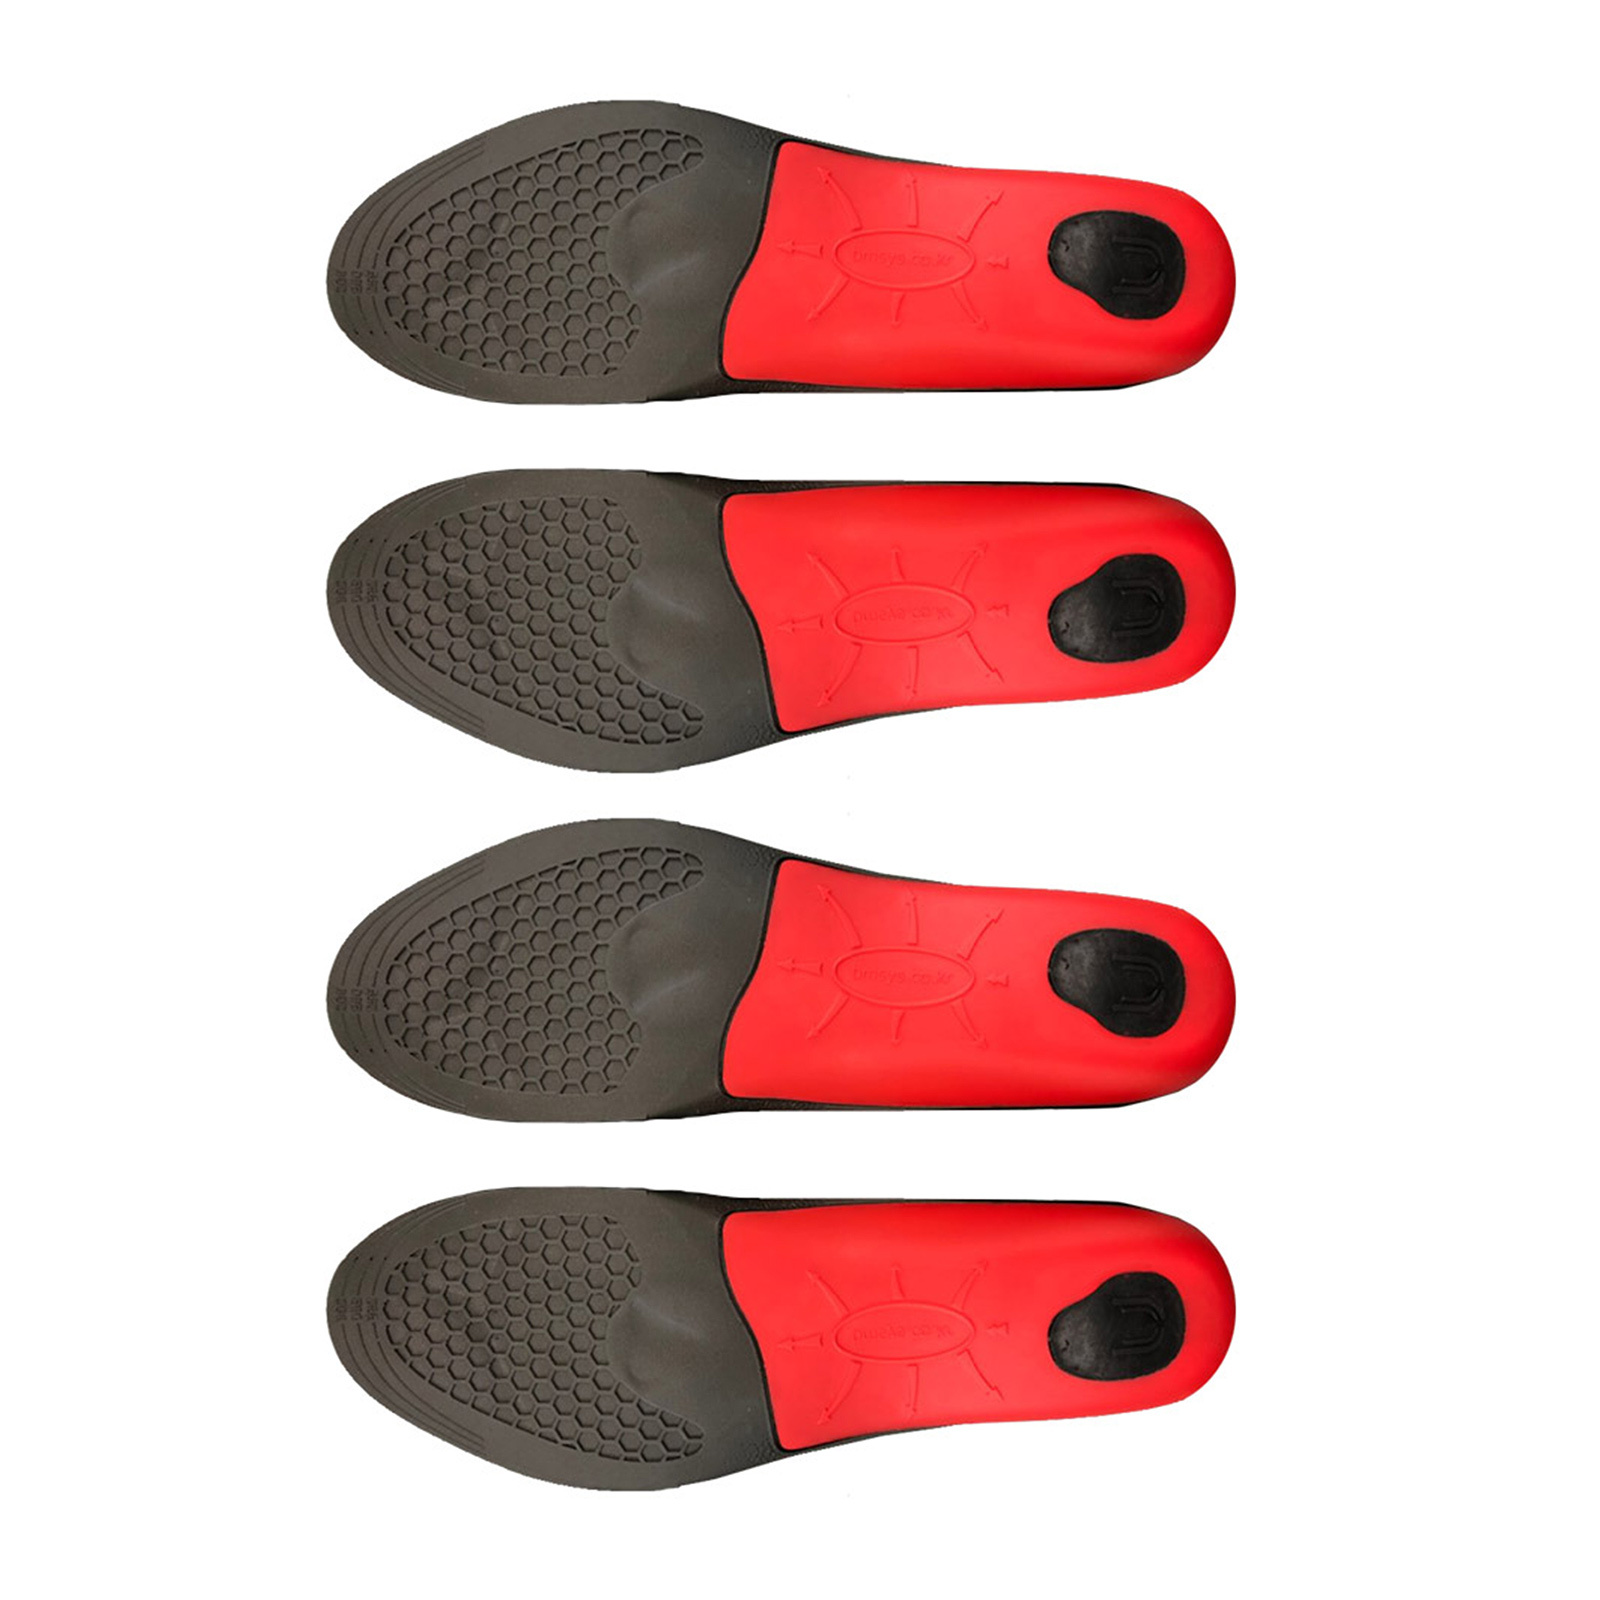 2X Pair Full Whole Shoe Insoles Arch Support Medium